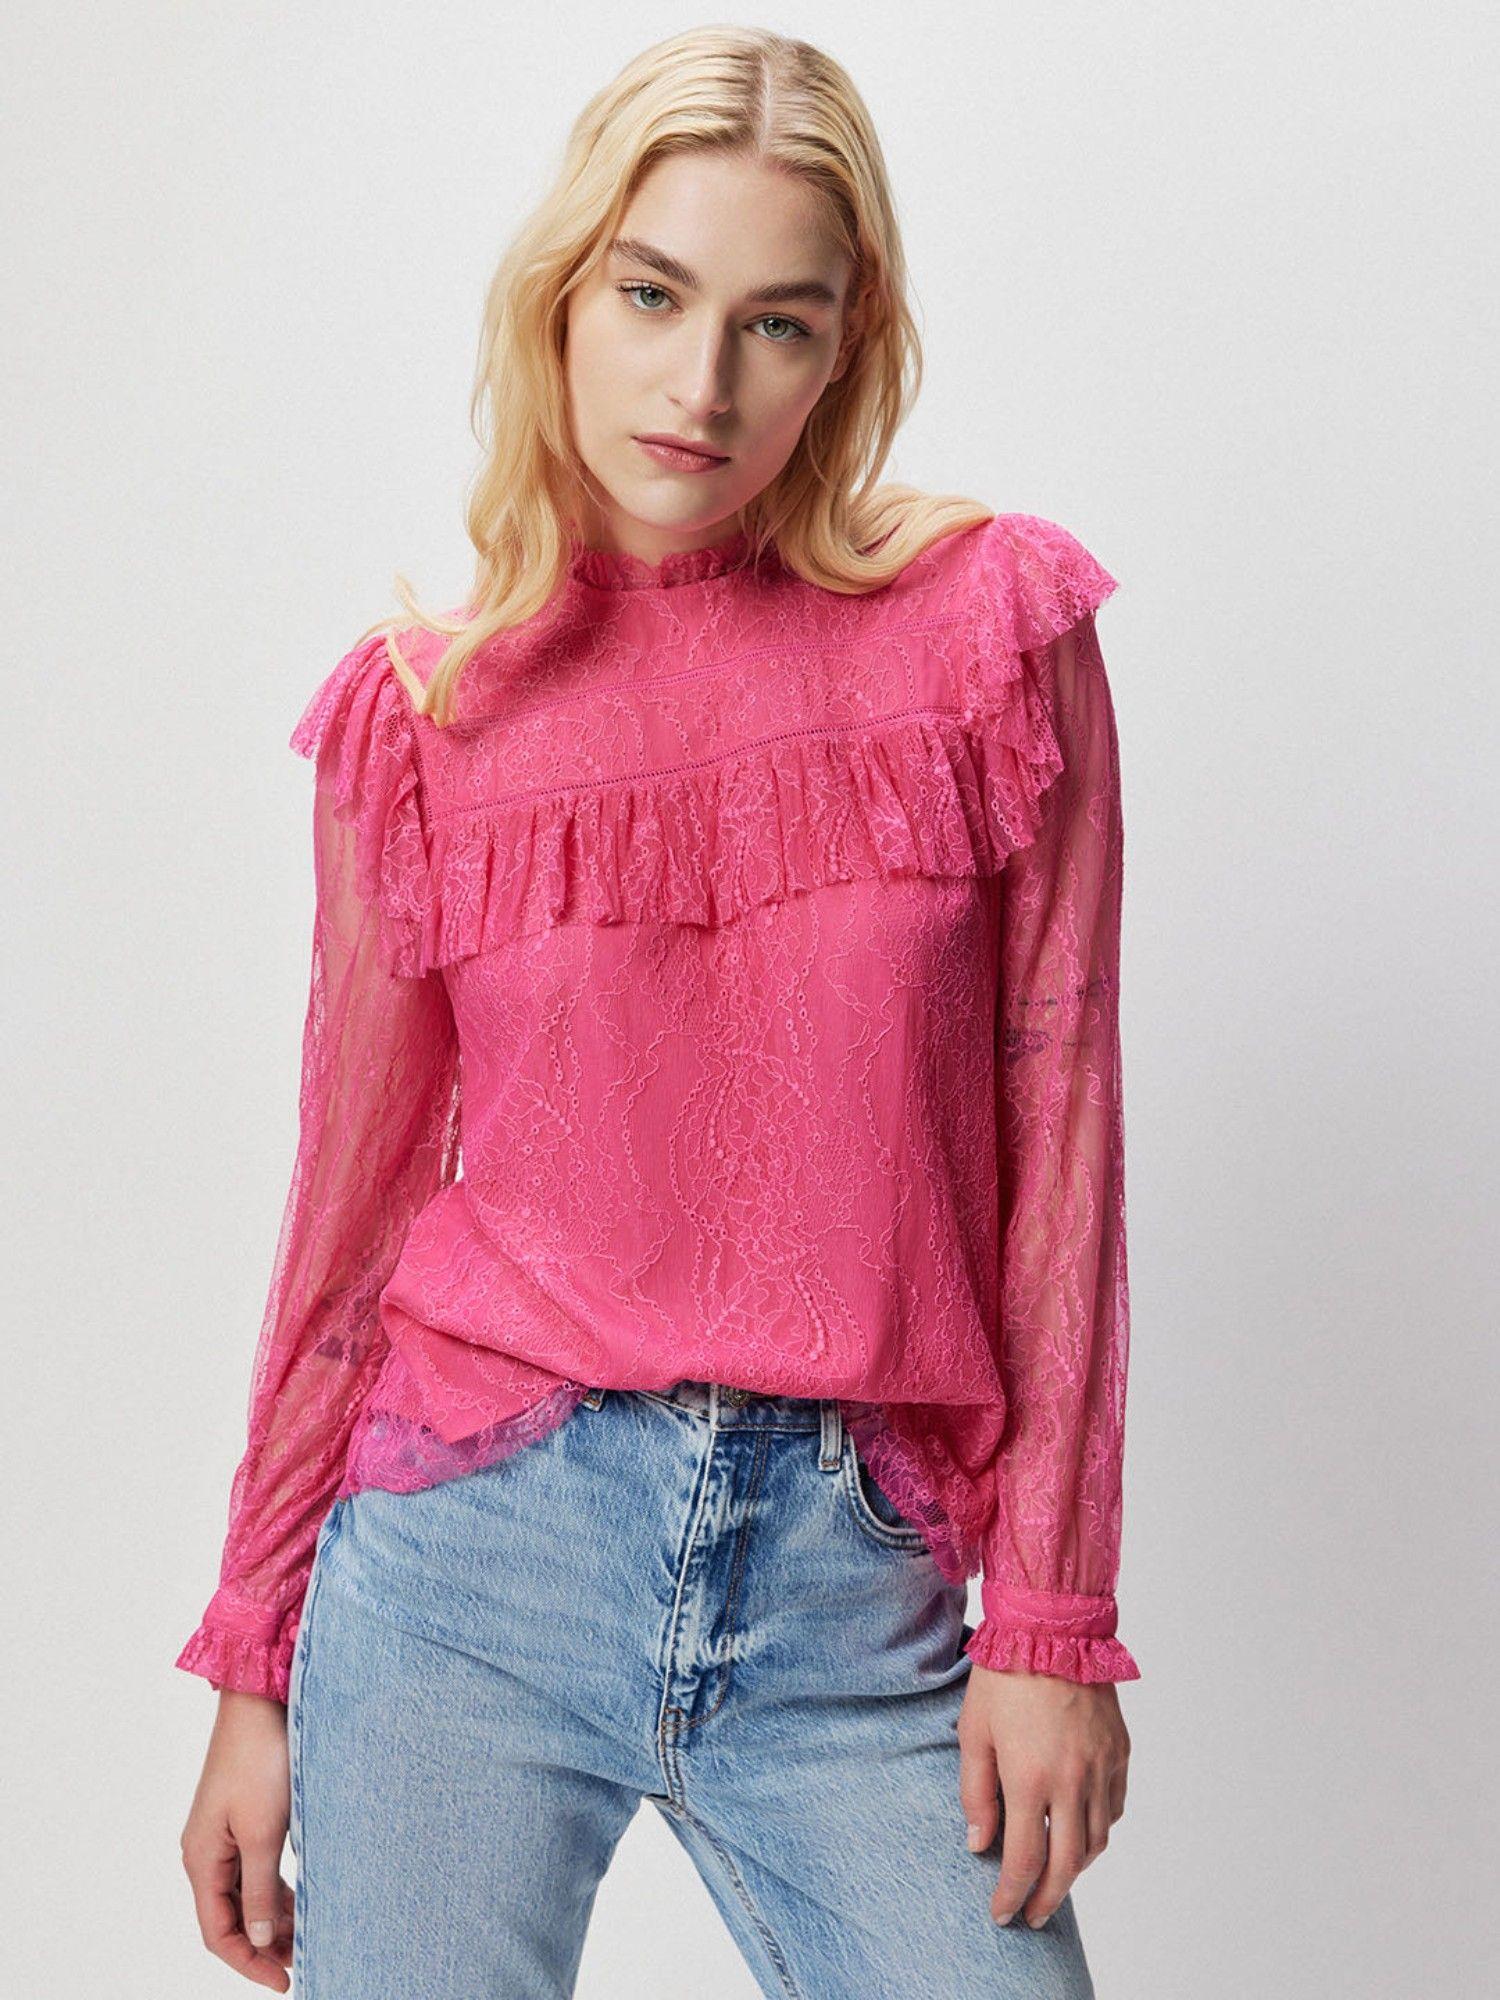 pink high neck lace top